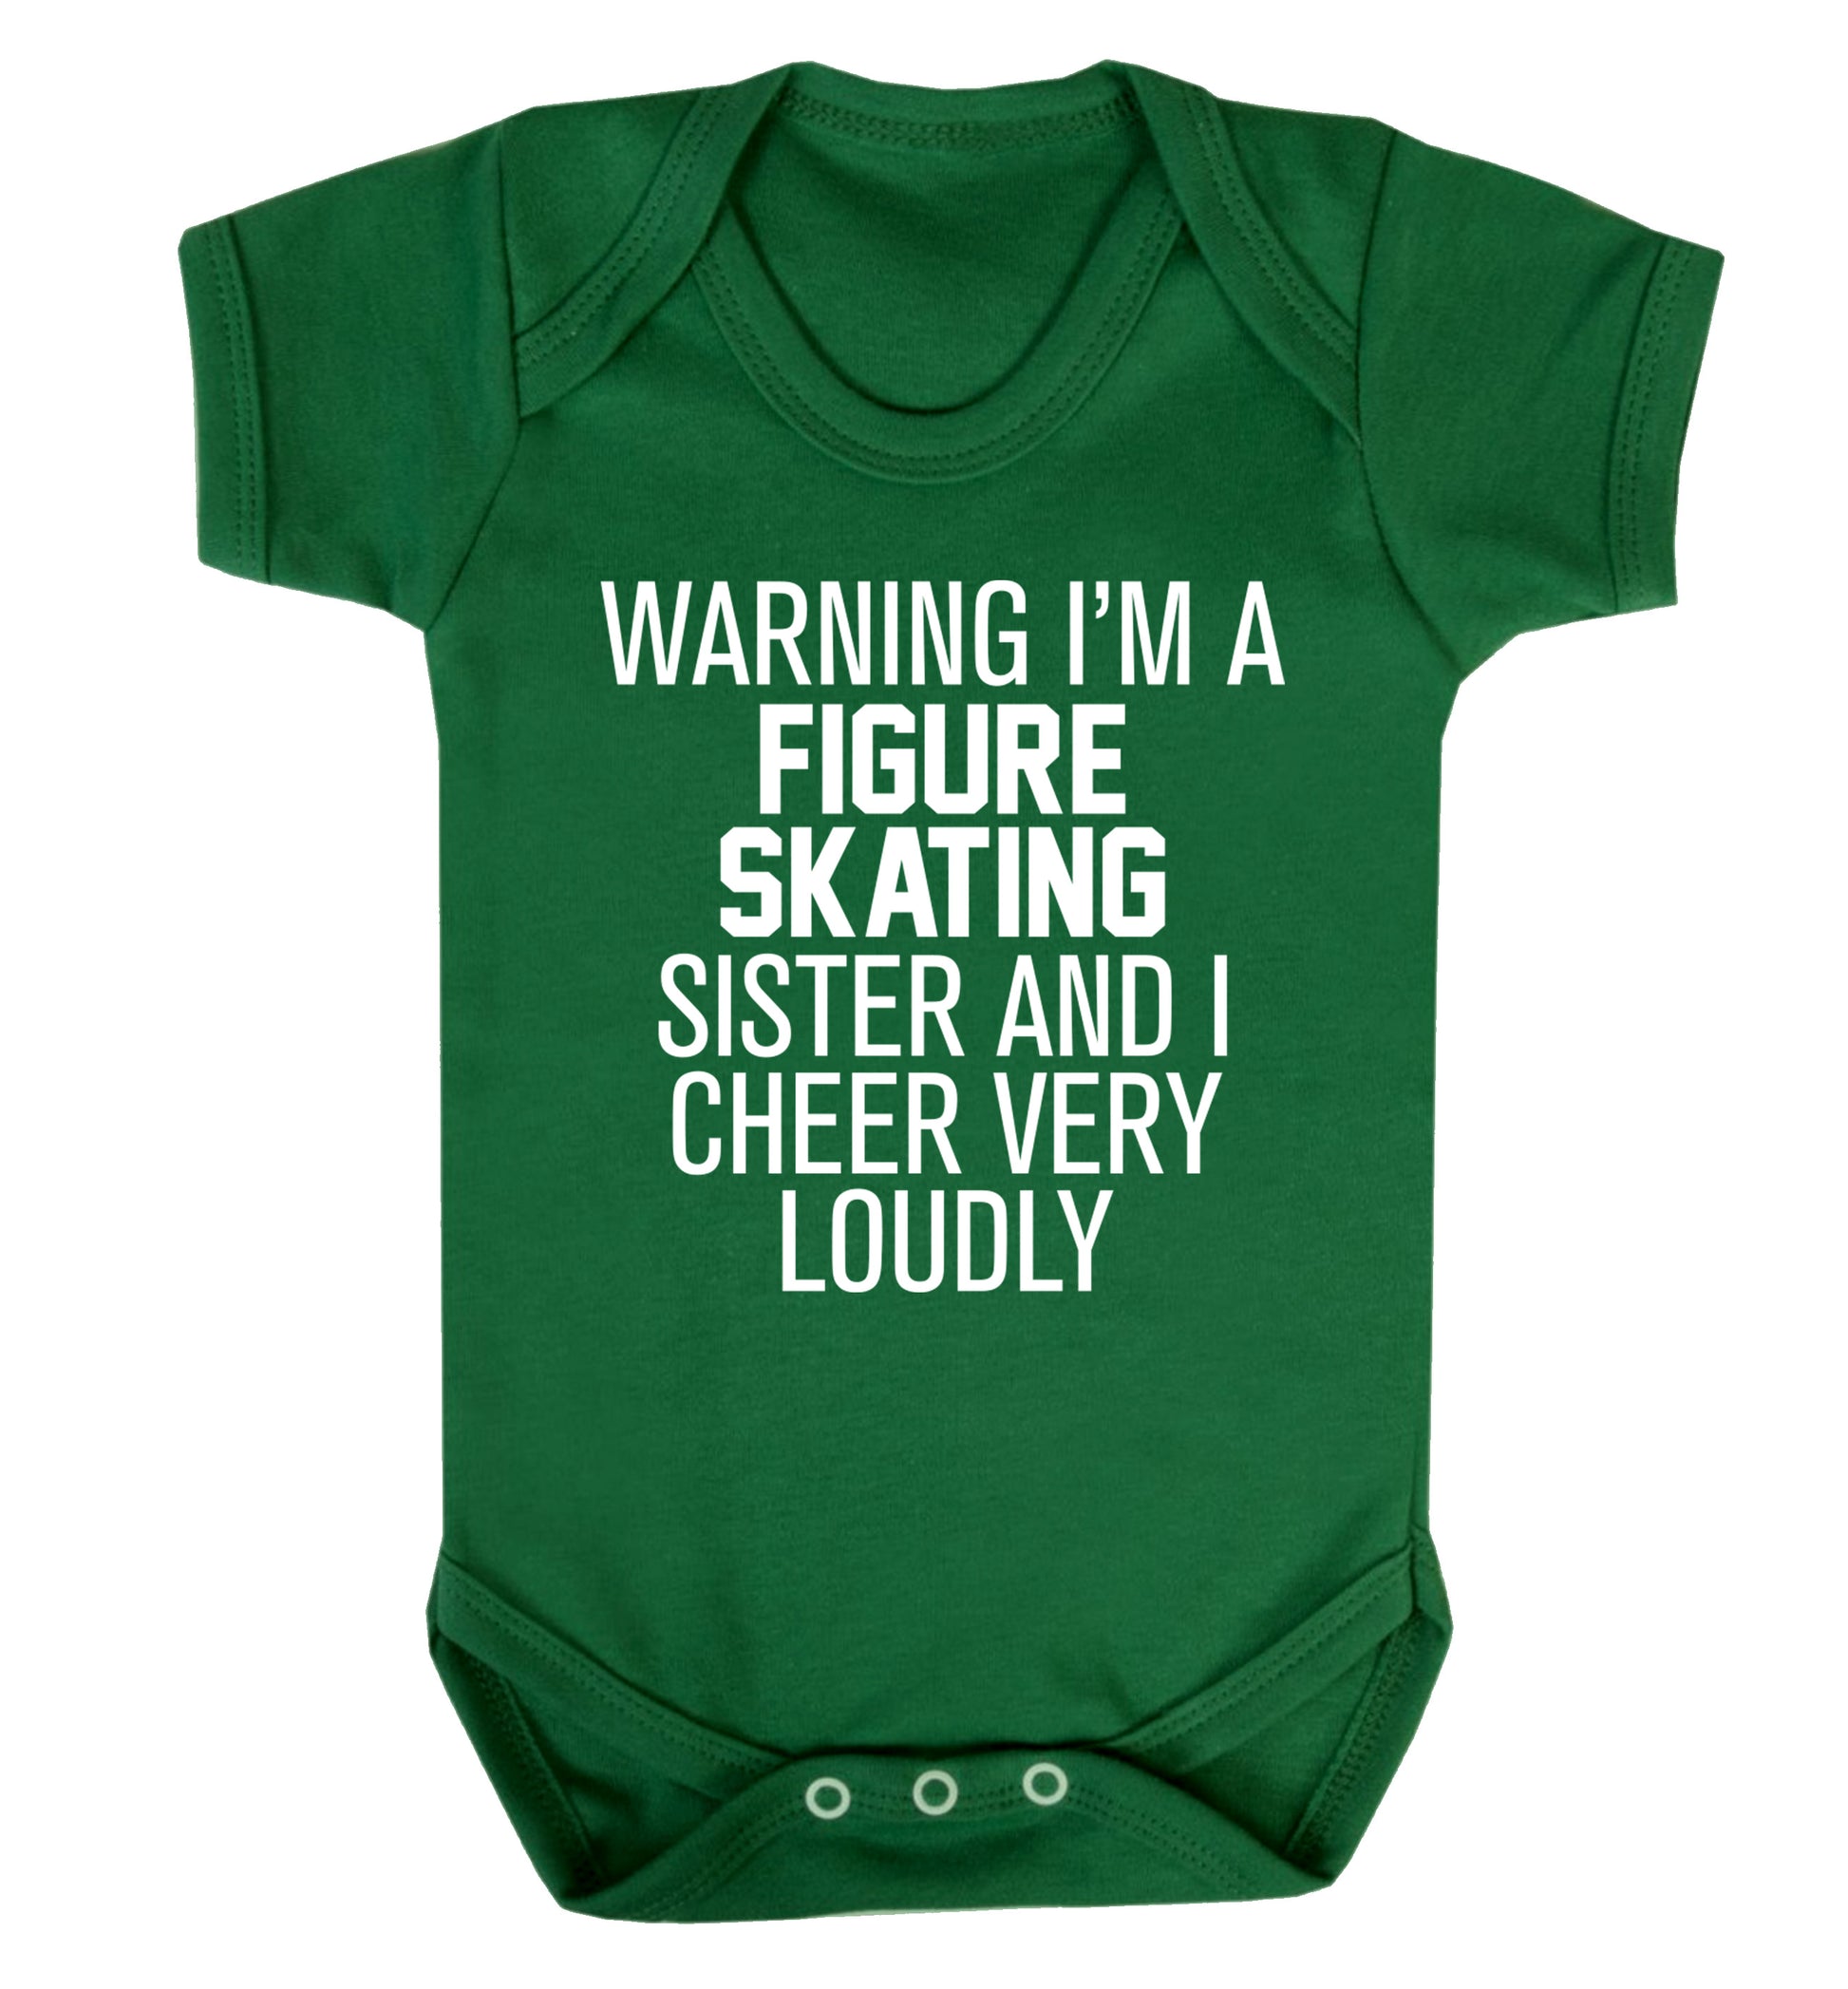 Warning I'm a figure skating sister and I cheer very loudly Baby Vest green 18-24 months